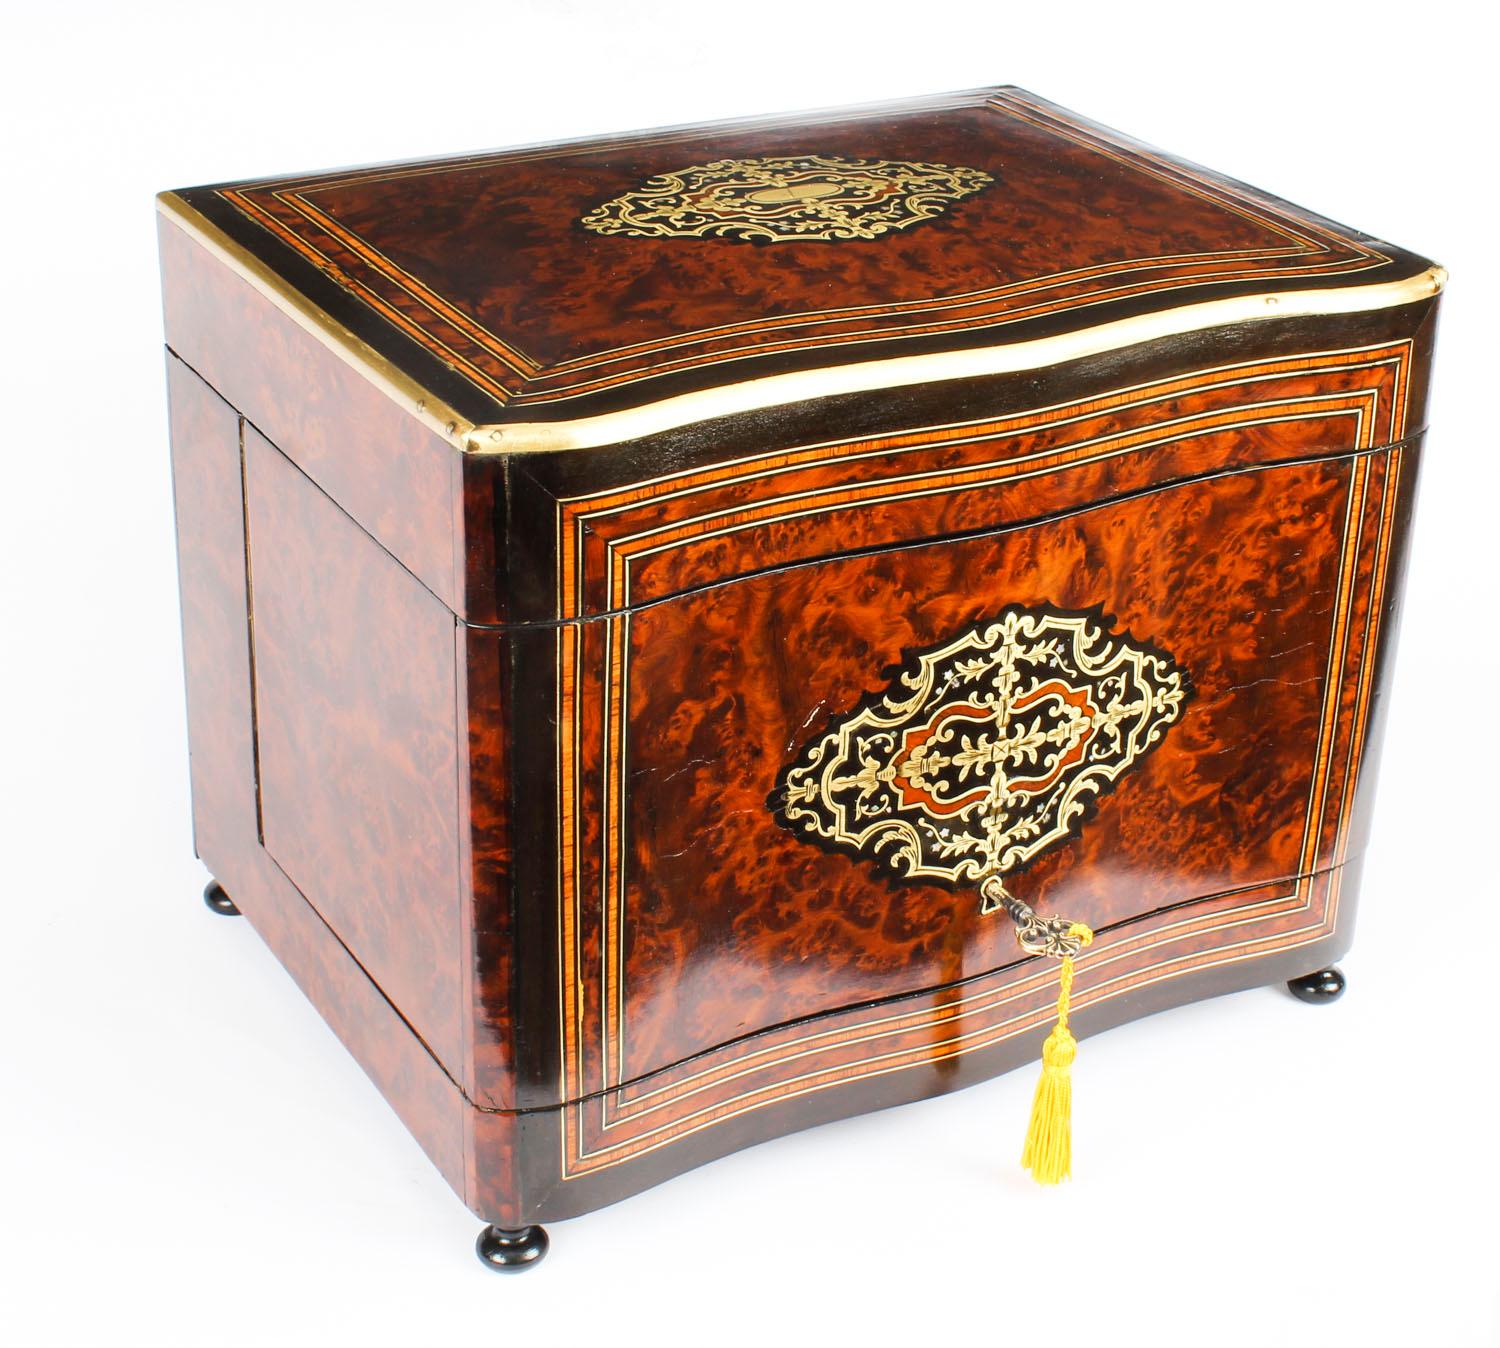 This is an exquisite antique French Napoleon III period walnut and boulle marquetry cave à liqueur, circa 1860 in date.

The tantalus has a serpentine front and a hinged lid which opens to reveal a caddy with four beautiful cut glass decanters and